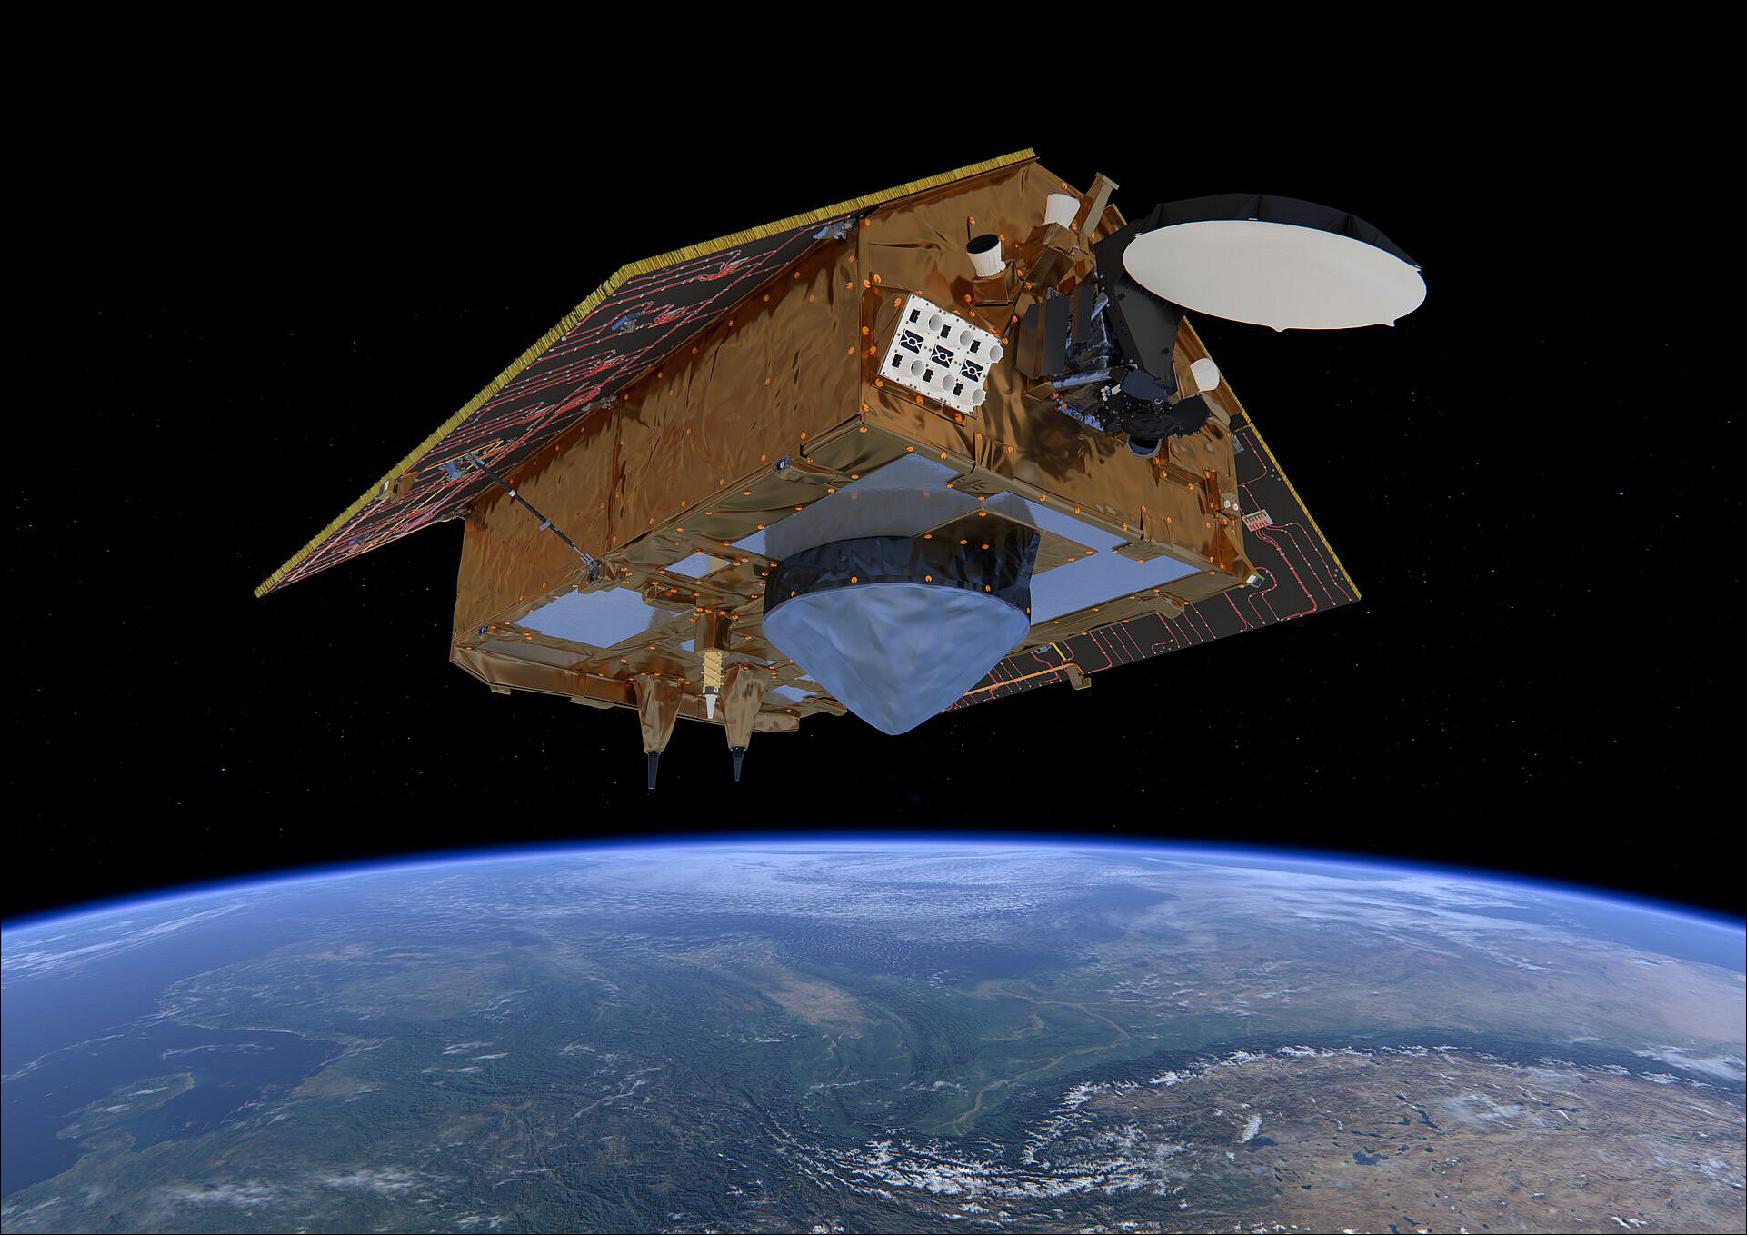 Figure 51: The Copernicus Sentinel-6 mission comprises two identical satellites launched five years apart. It not only serves Copernicus, but also the international climate community. Since sea-level rise is a key indicator of climate change, accurately monitoring the changing height of the sea surface over decades is essential for climate science, for policy-making and, ultimately, for protecting lives in vulnerable low-lying areas. Copernicus Sentinel-6 is taking on the role of radar altimetry reference mission, continuing the long-term record of measurements of sea-surface height started in 1992 by the French–US Topex Poseidon and then the Jason satellites. Importantly, Sentinel-6 brings, for the first time, synthetic aperture radar into the altimetry reference mission time series (image credit: ESA/ATG medialab)